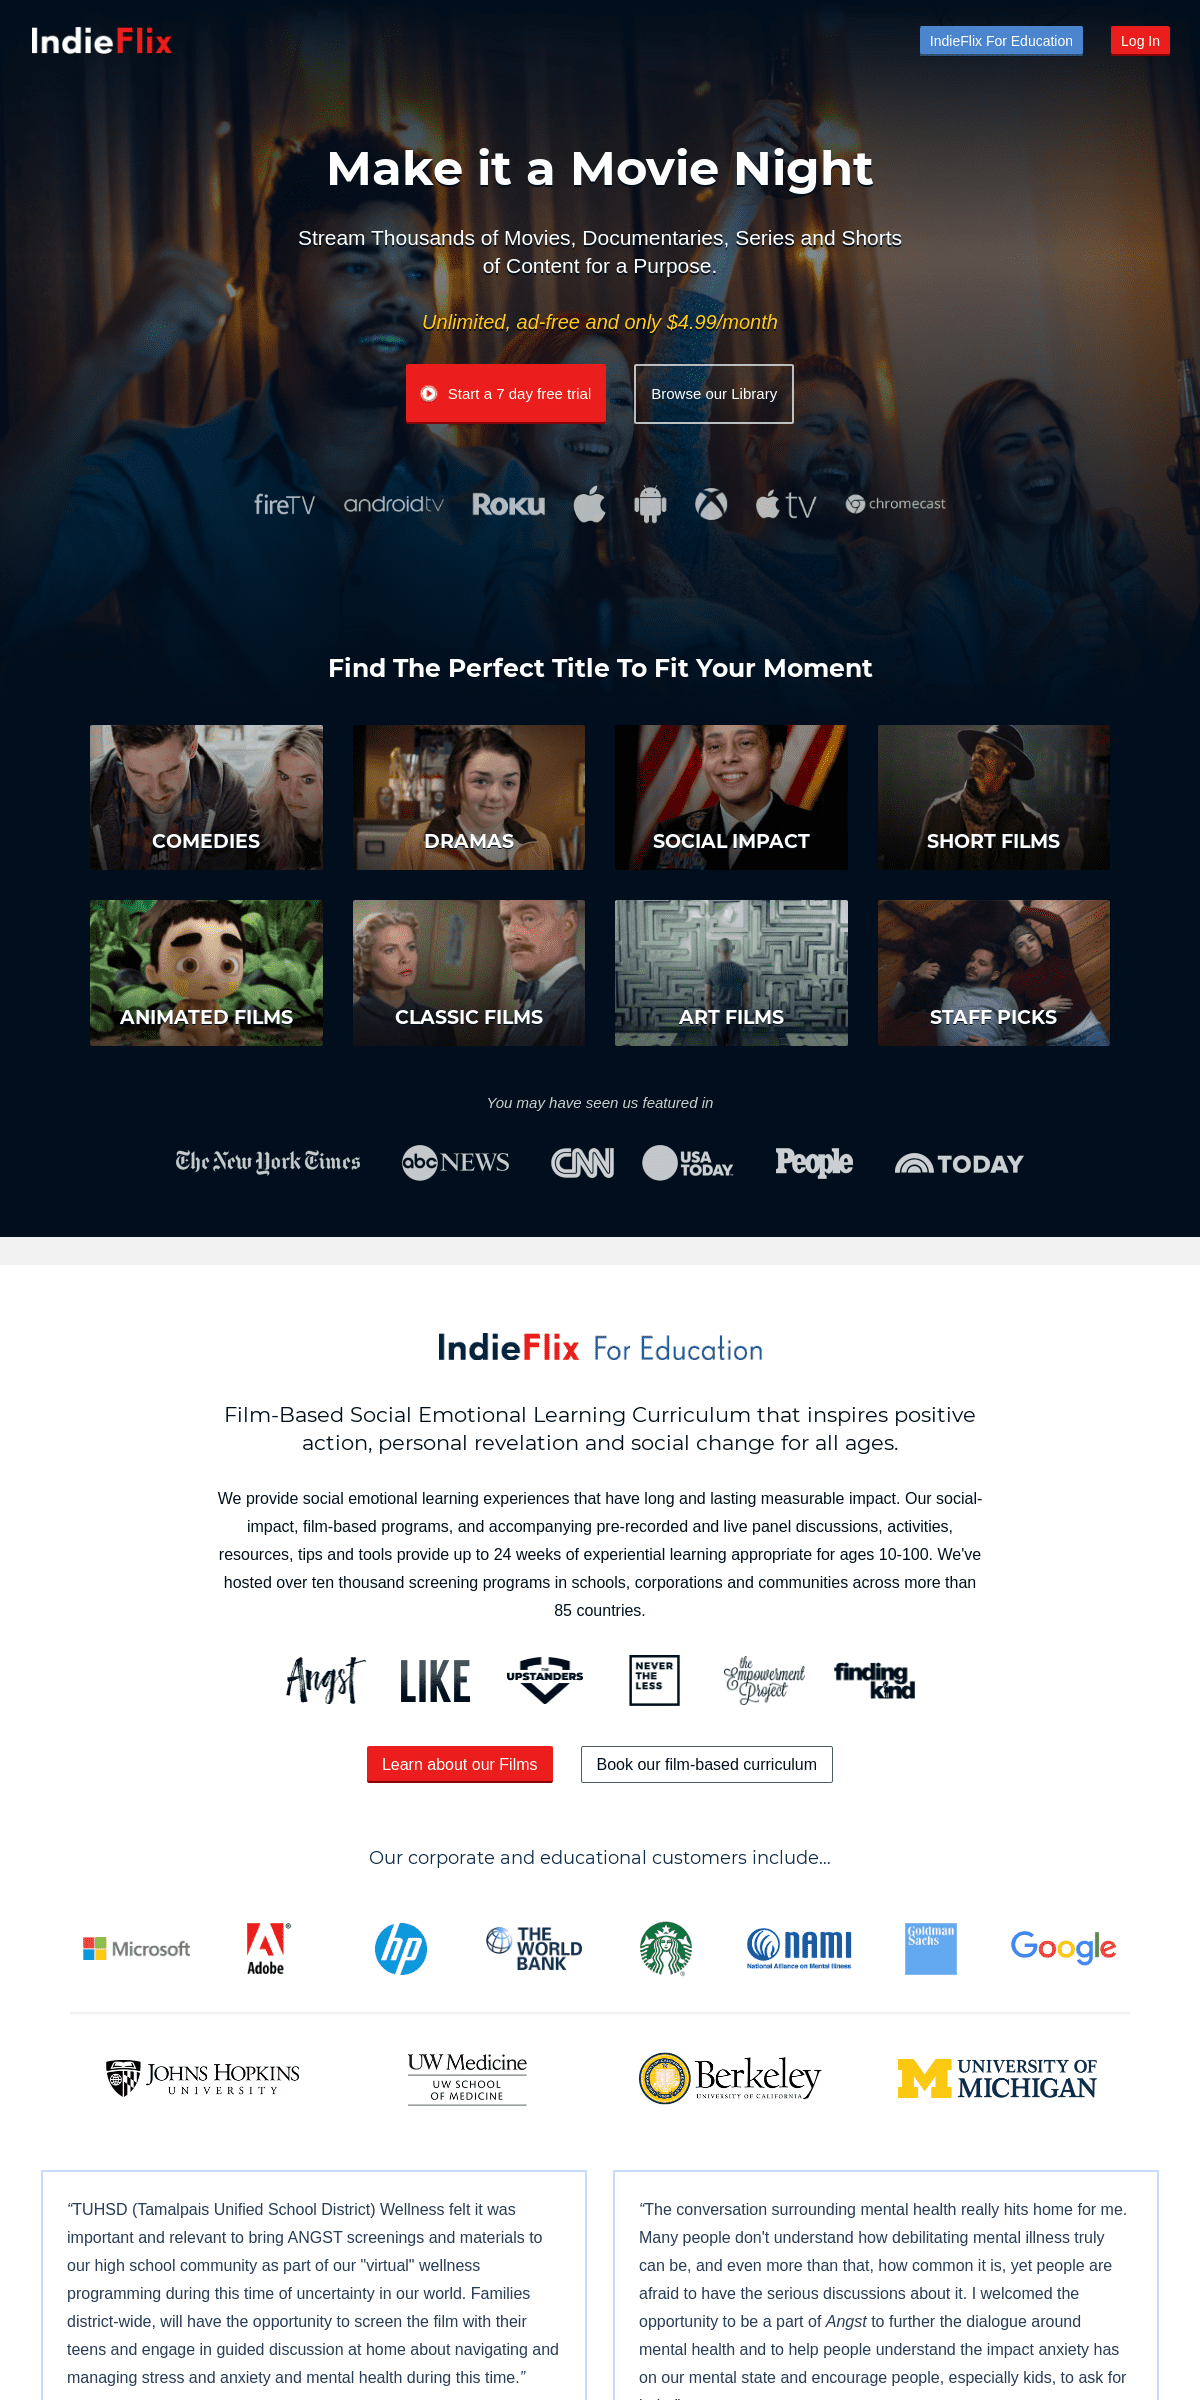 A complete backup of indieflix.com